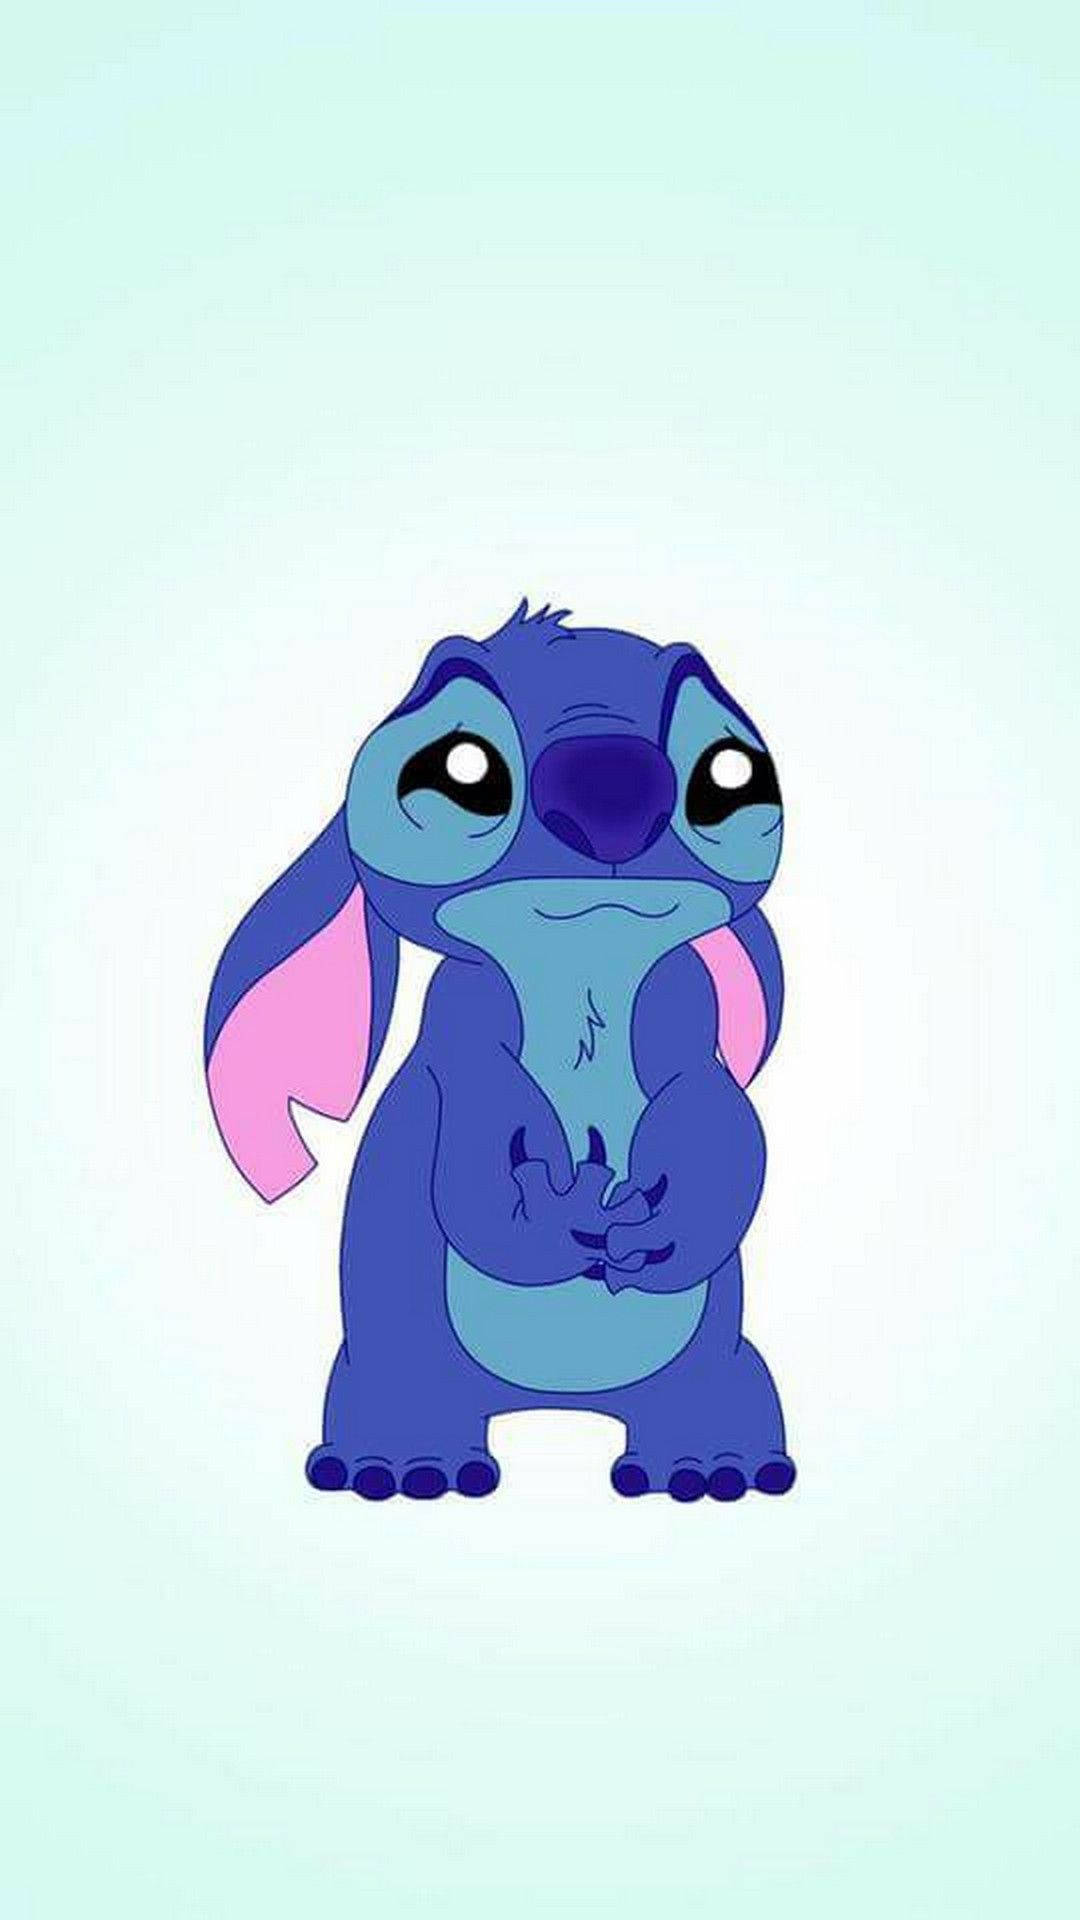 Cute Aesthetic Stitch Sad And Crying Background